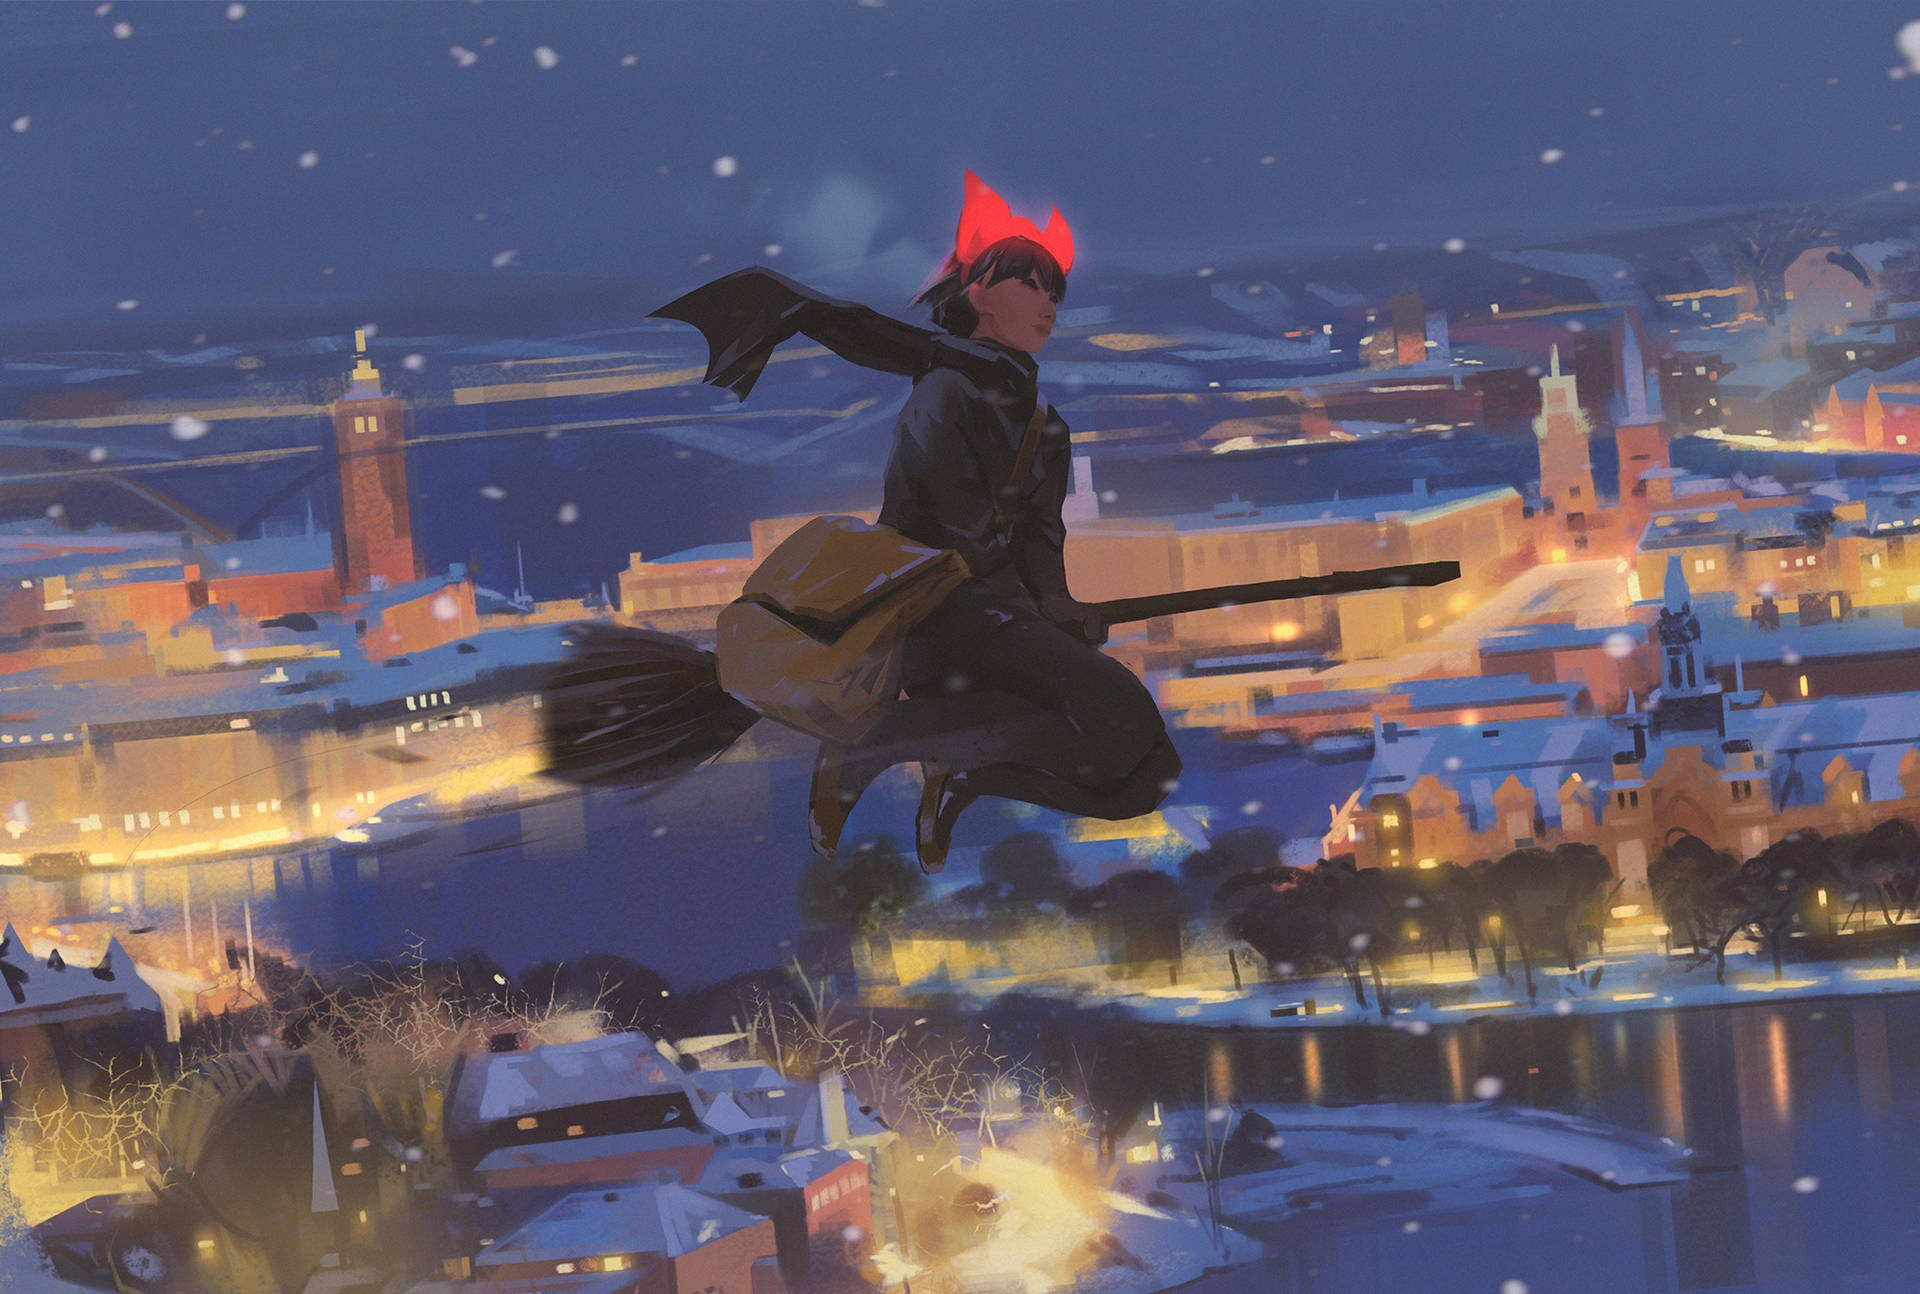 Kikis Delivery Service Oil Painting Wallpaper